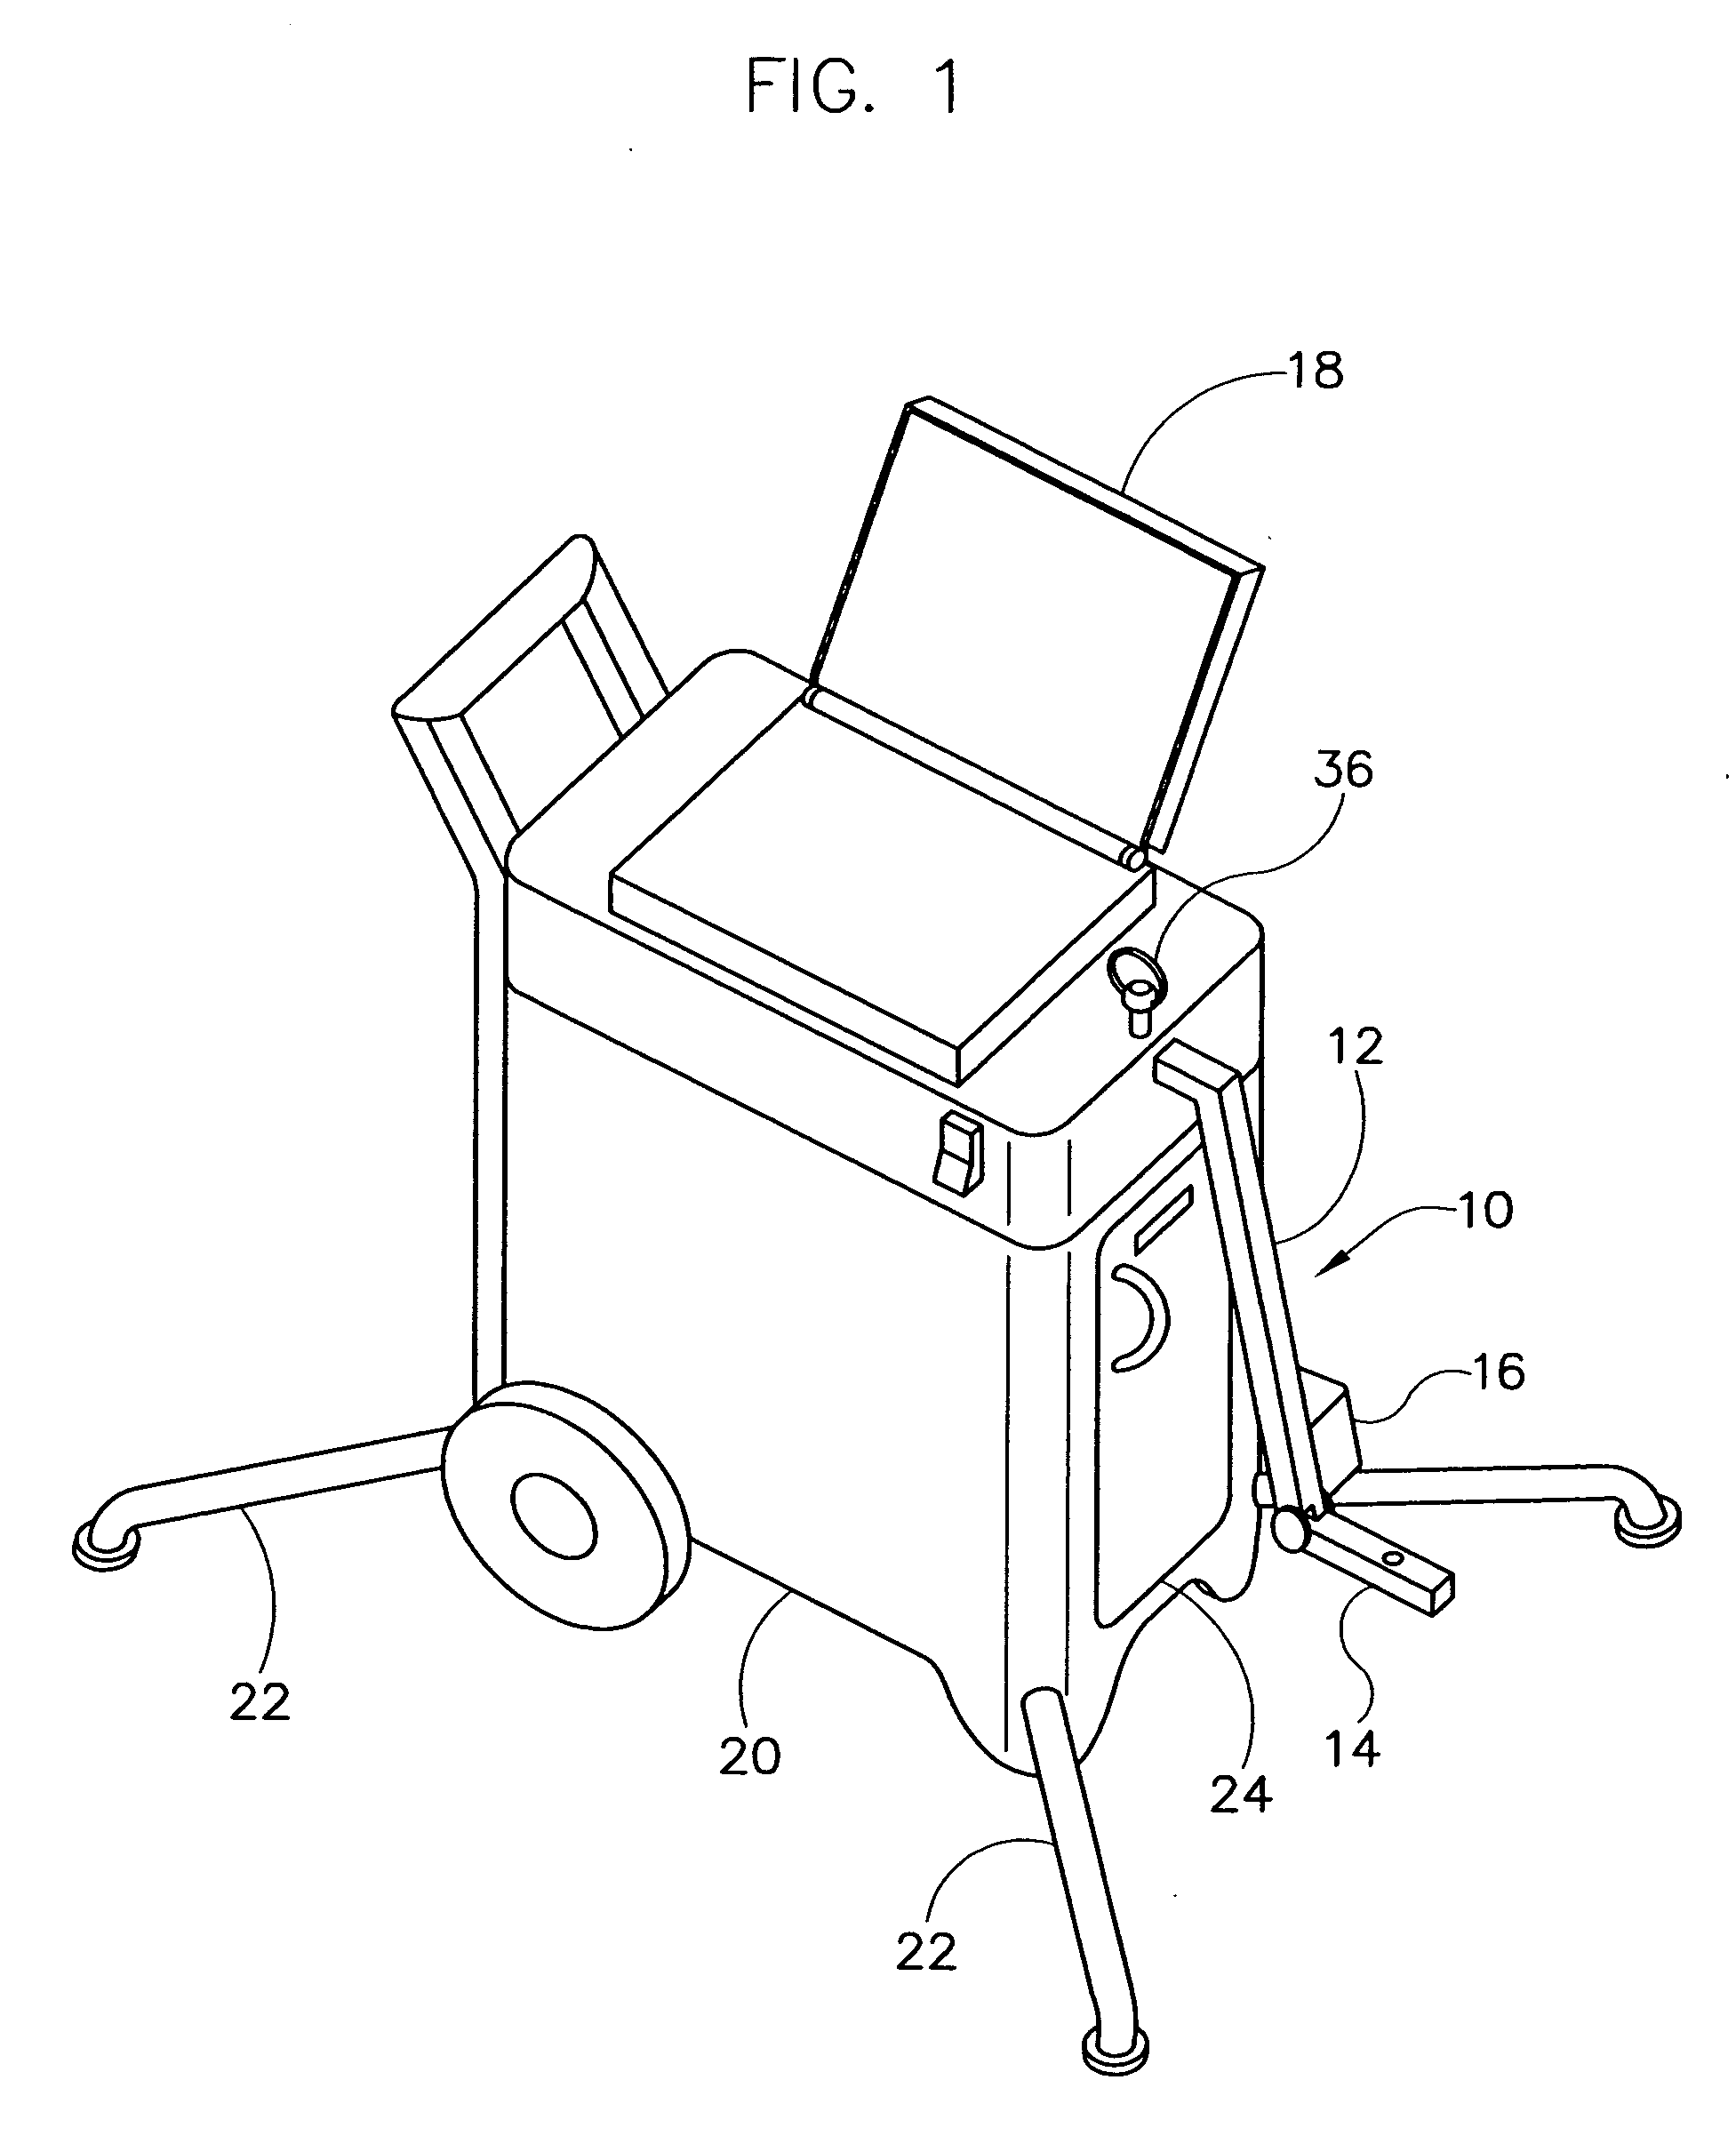 Method and apparatus for resistive characteristic assessment